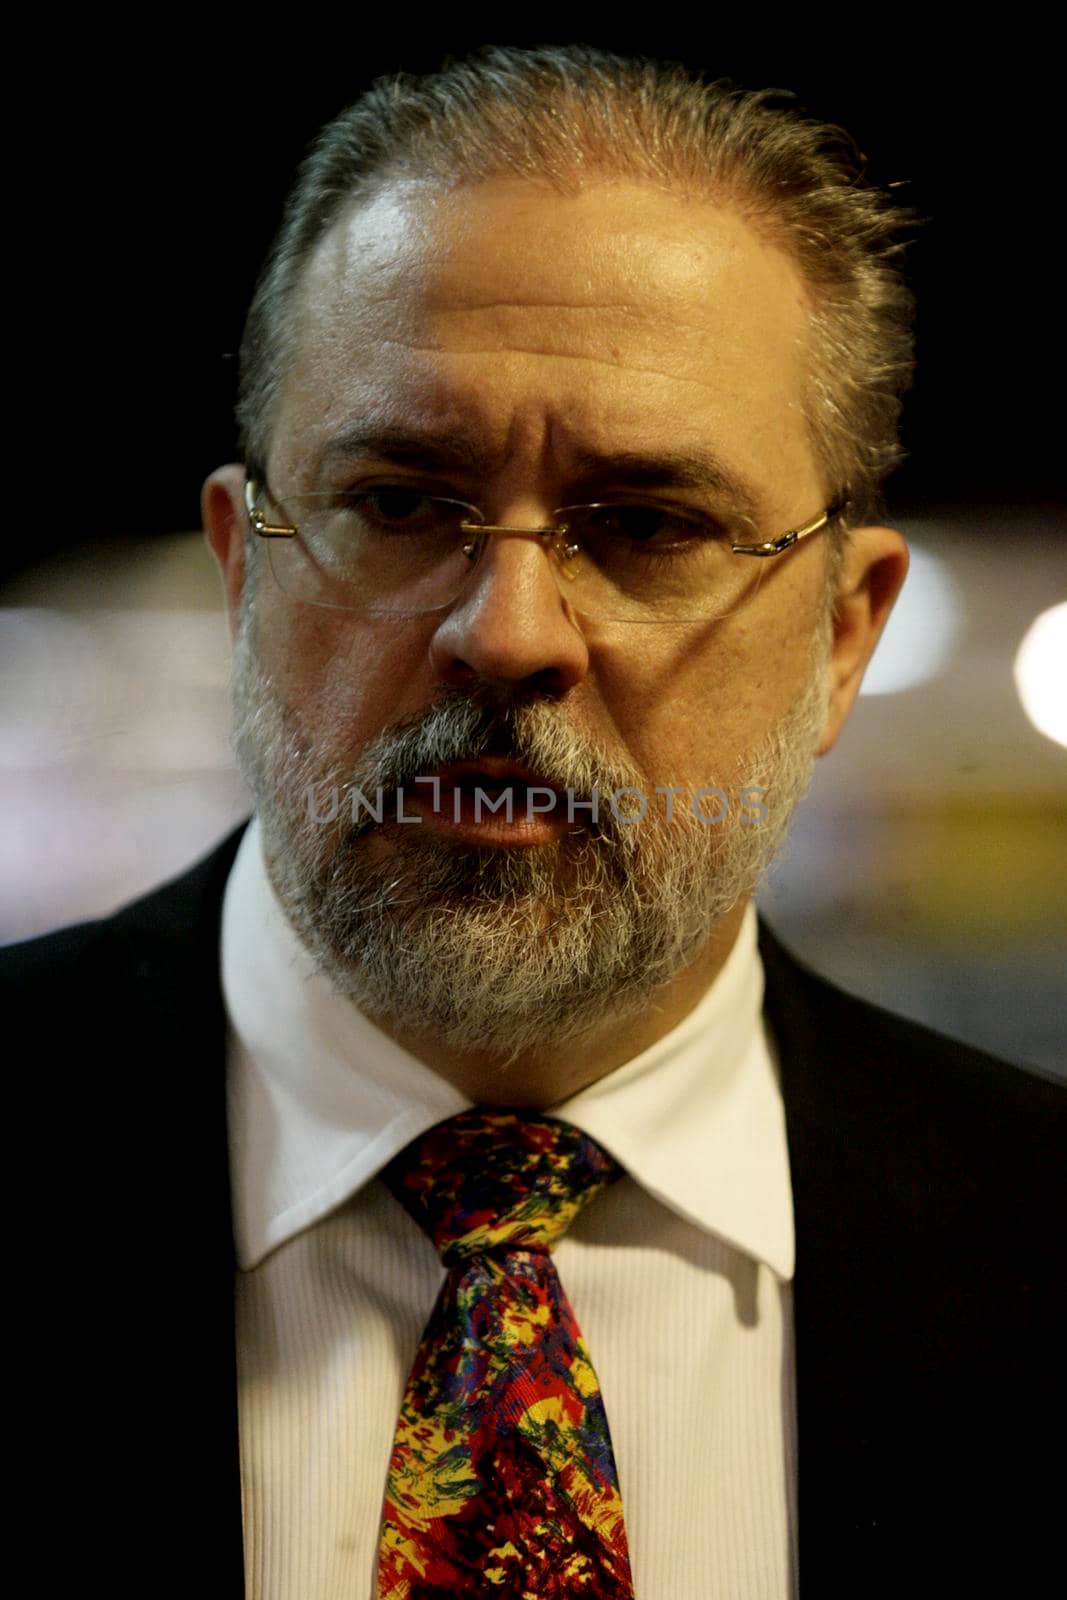 salvador, bahia / brazil - june 16, 2016: Augusto Aras, Attorney General of the Republic, professor and jurist specialized in Electoral Law is seen in the city of Salvador.